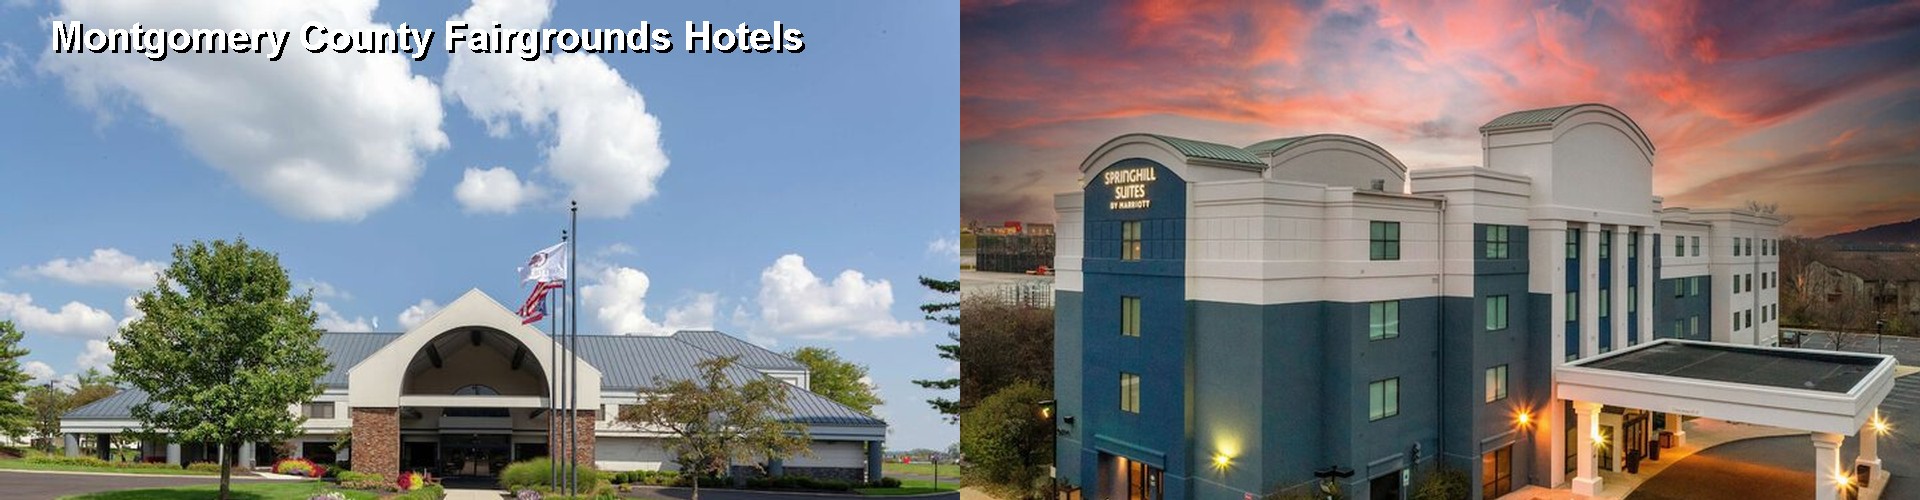 1 Best Hotels near Montgomery County Fairgrounds